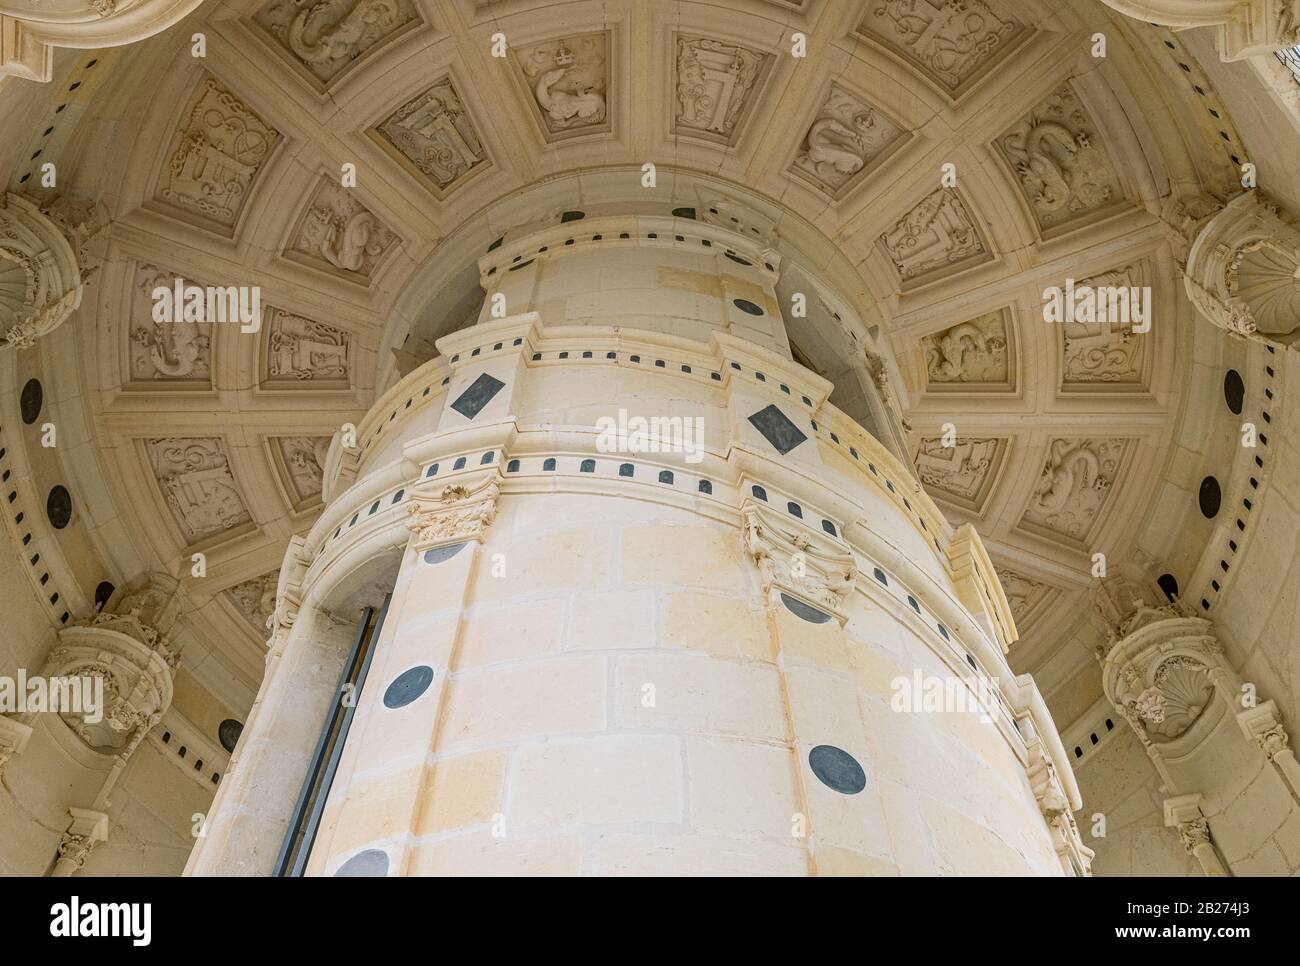 Chambord, France - November 14, 2018: The central column of the  double helix staircase of the Chambord castle Stock Photo